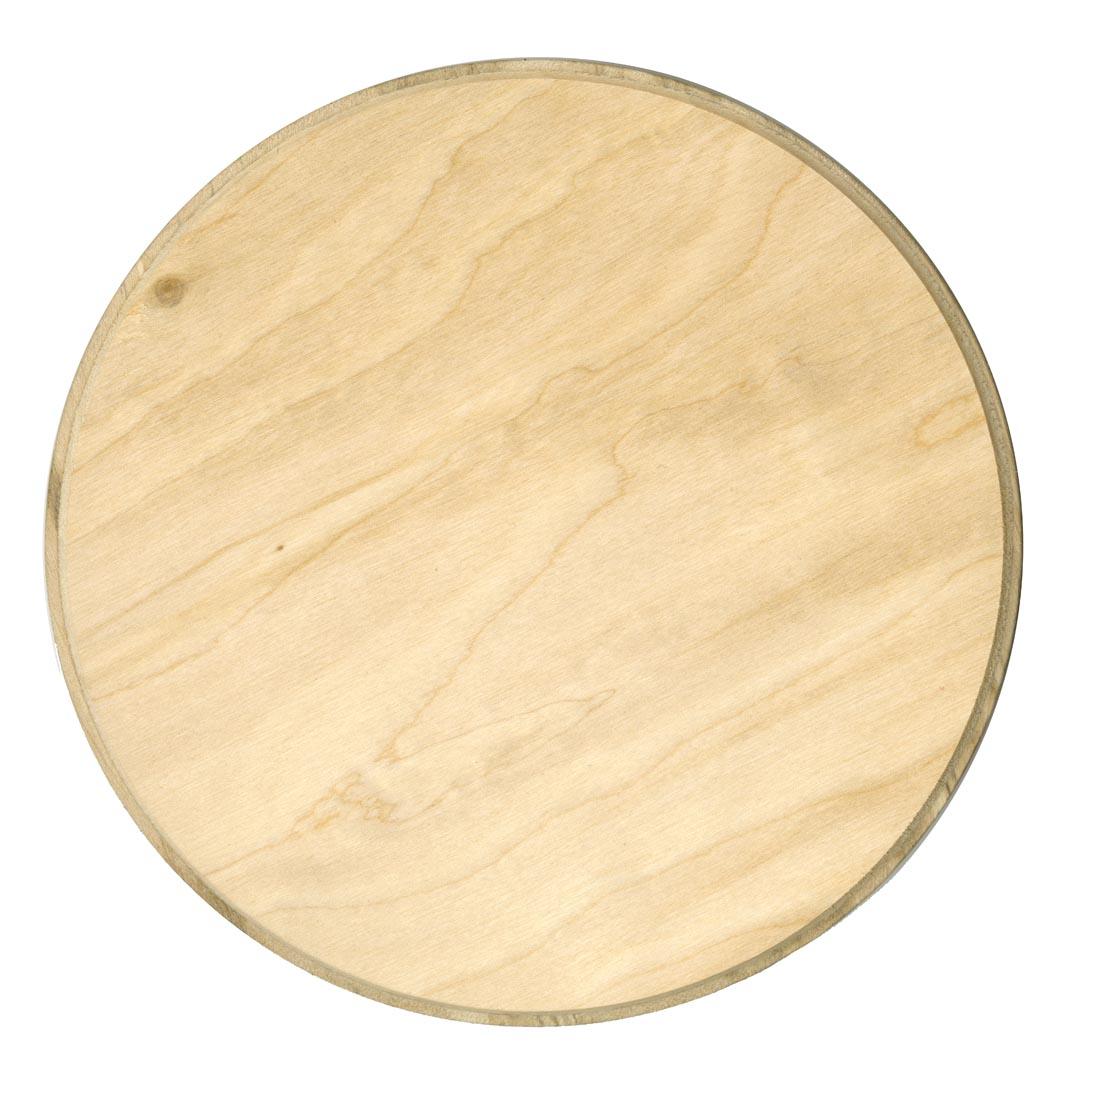 Wooden Circle Value Plaque by Walnut Hollow